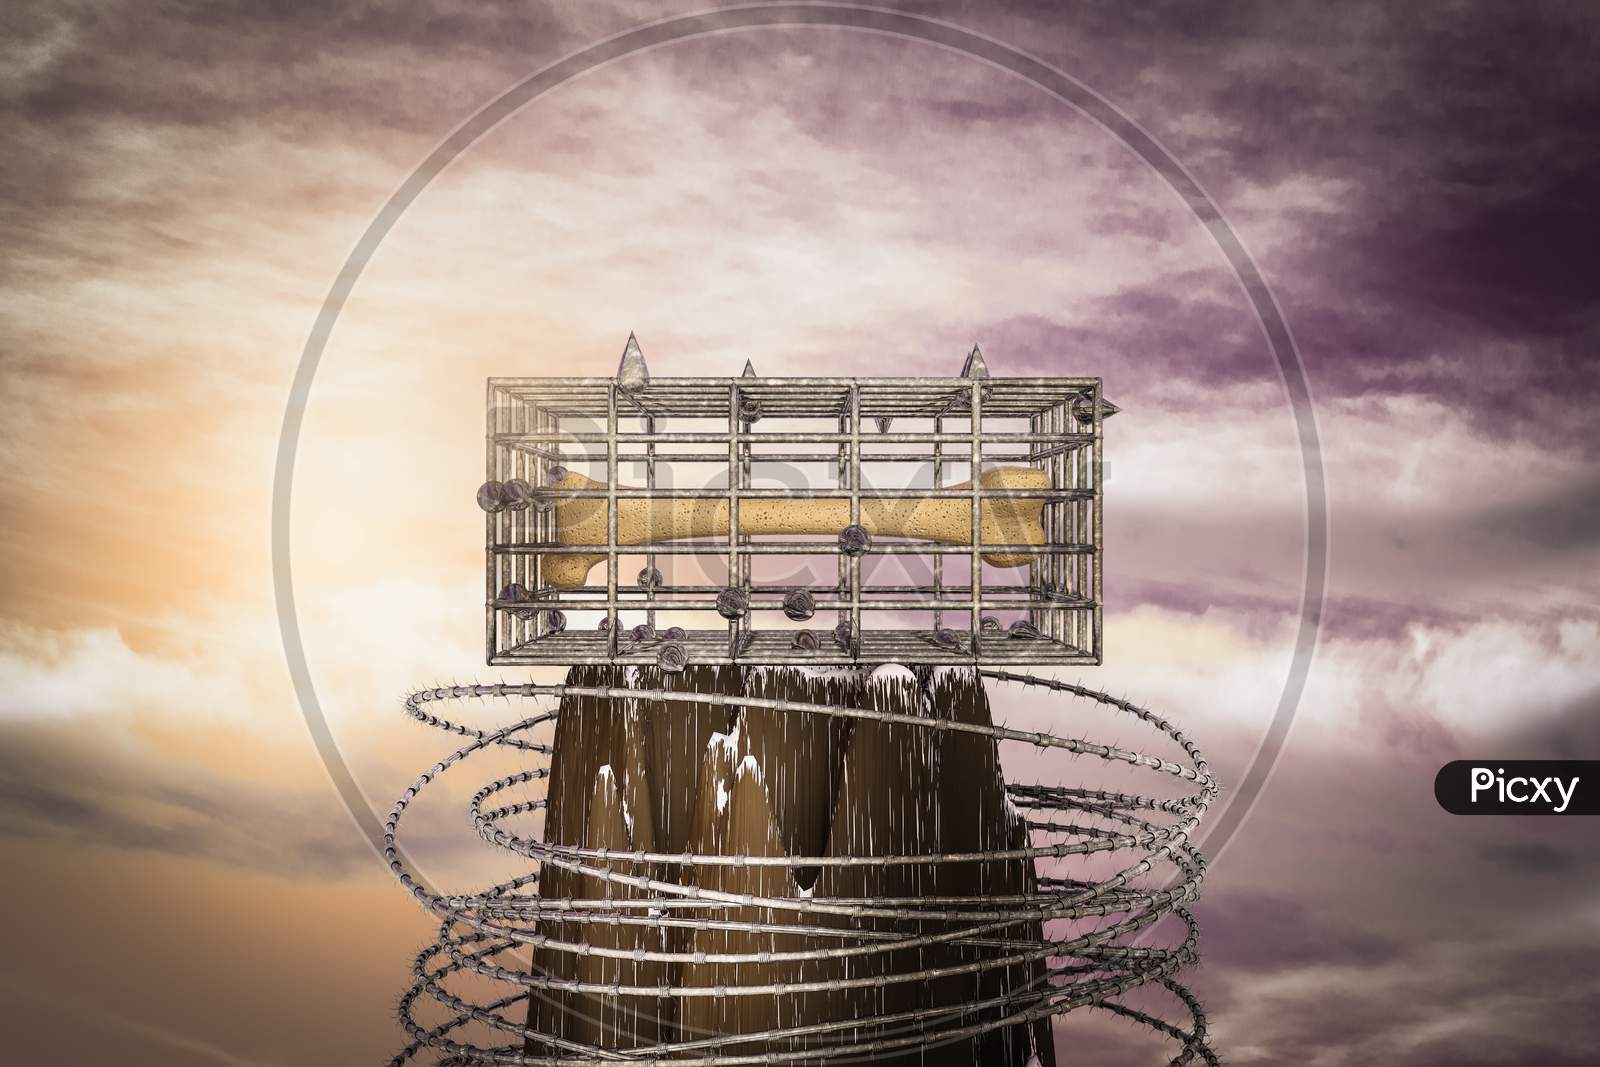 Human Thigh Bone In A Cage On The Top Of A Mountain At Sunset Magenta Day. Human Thigh Bone Is Prisoner In Metal Cage Or No Freedom For Bones Concept. 3D Illustration